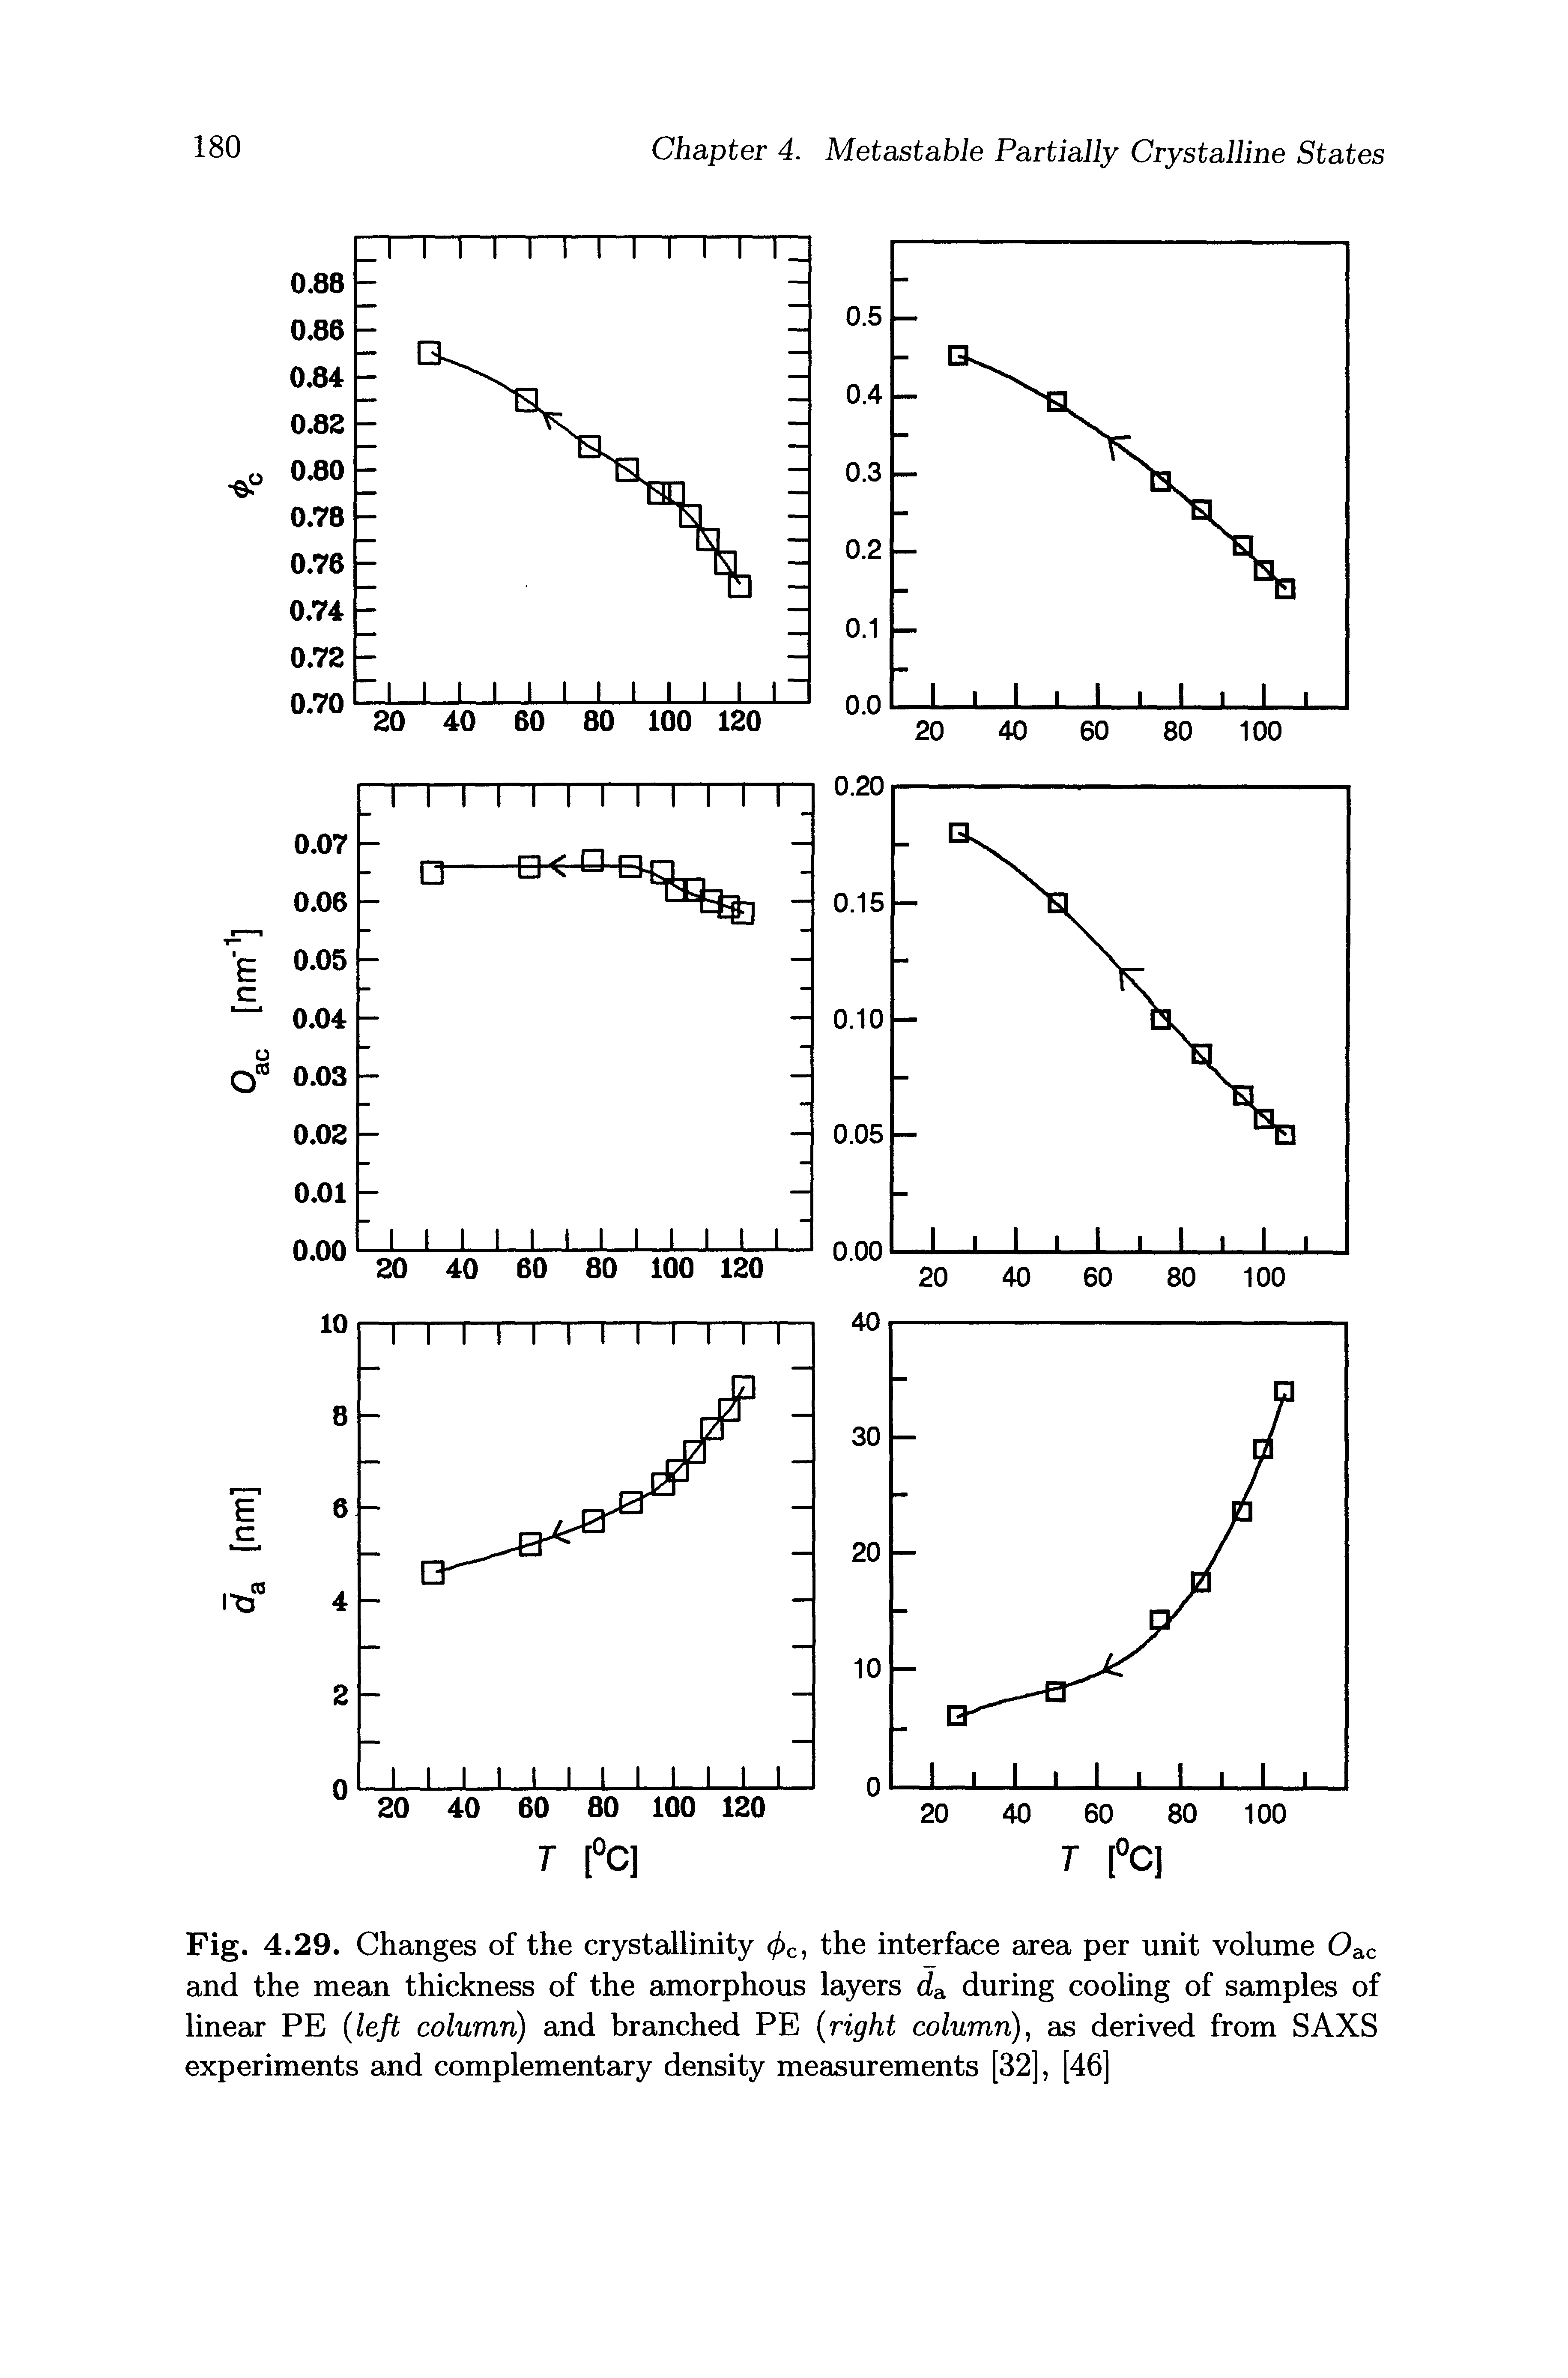 Fig. 4.29. Changes of the crystallinity </>c, the interface area per unit volume Oac and the mean thickness of the amorphous layers da during cooling of samples of linear PE left column) and branched PE right column) as derived from SAXS experiments and complementary density measurements [32], [46]...